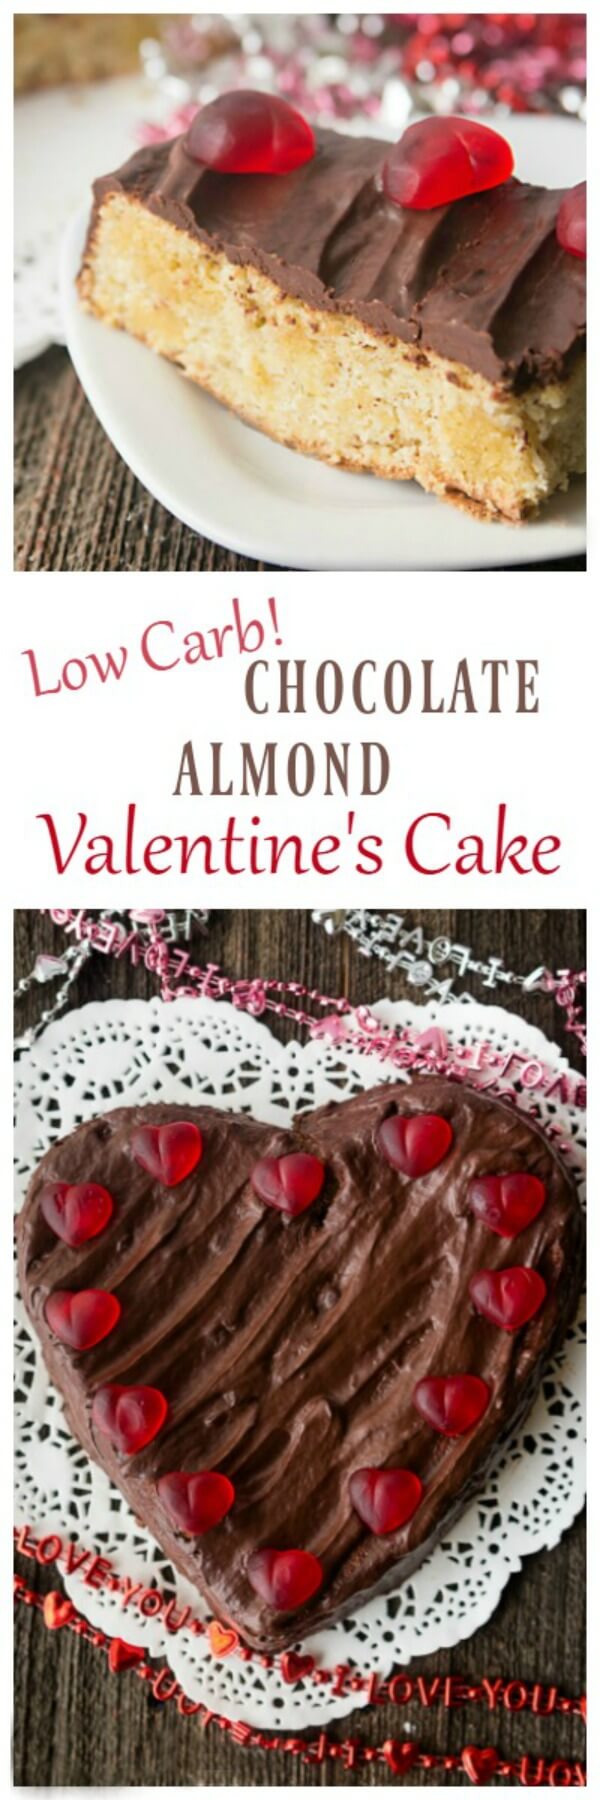 Low Carb Chocolate Almond Flour Cake baked in a heart shaped pan for Valentine's Day